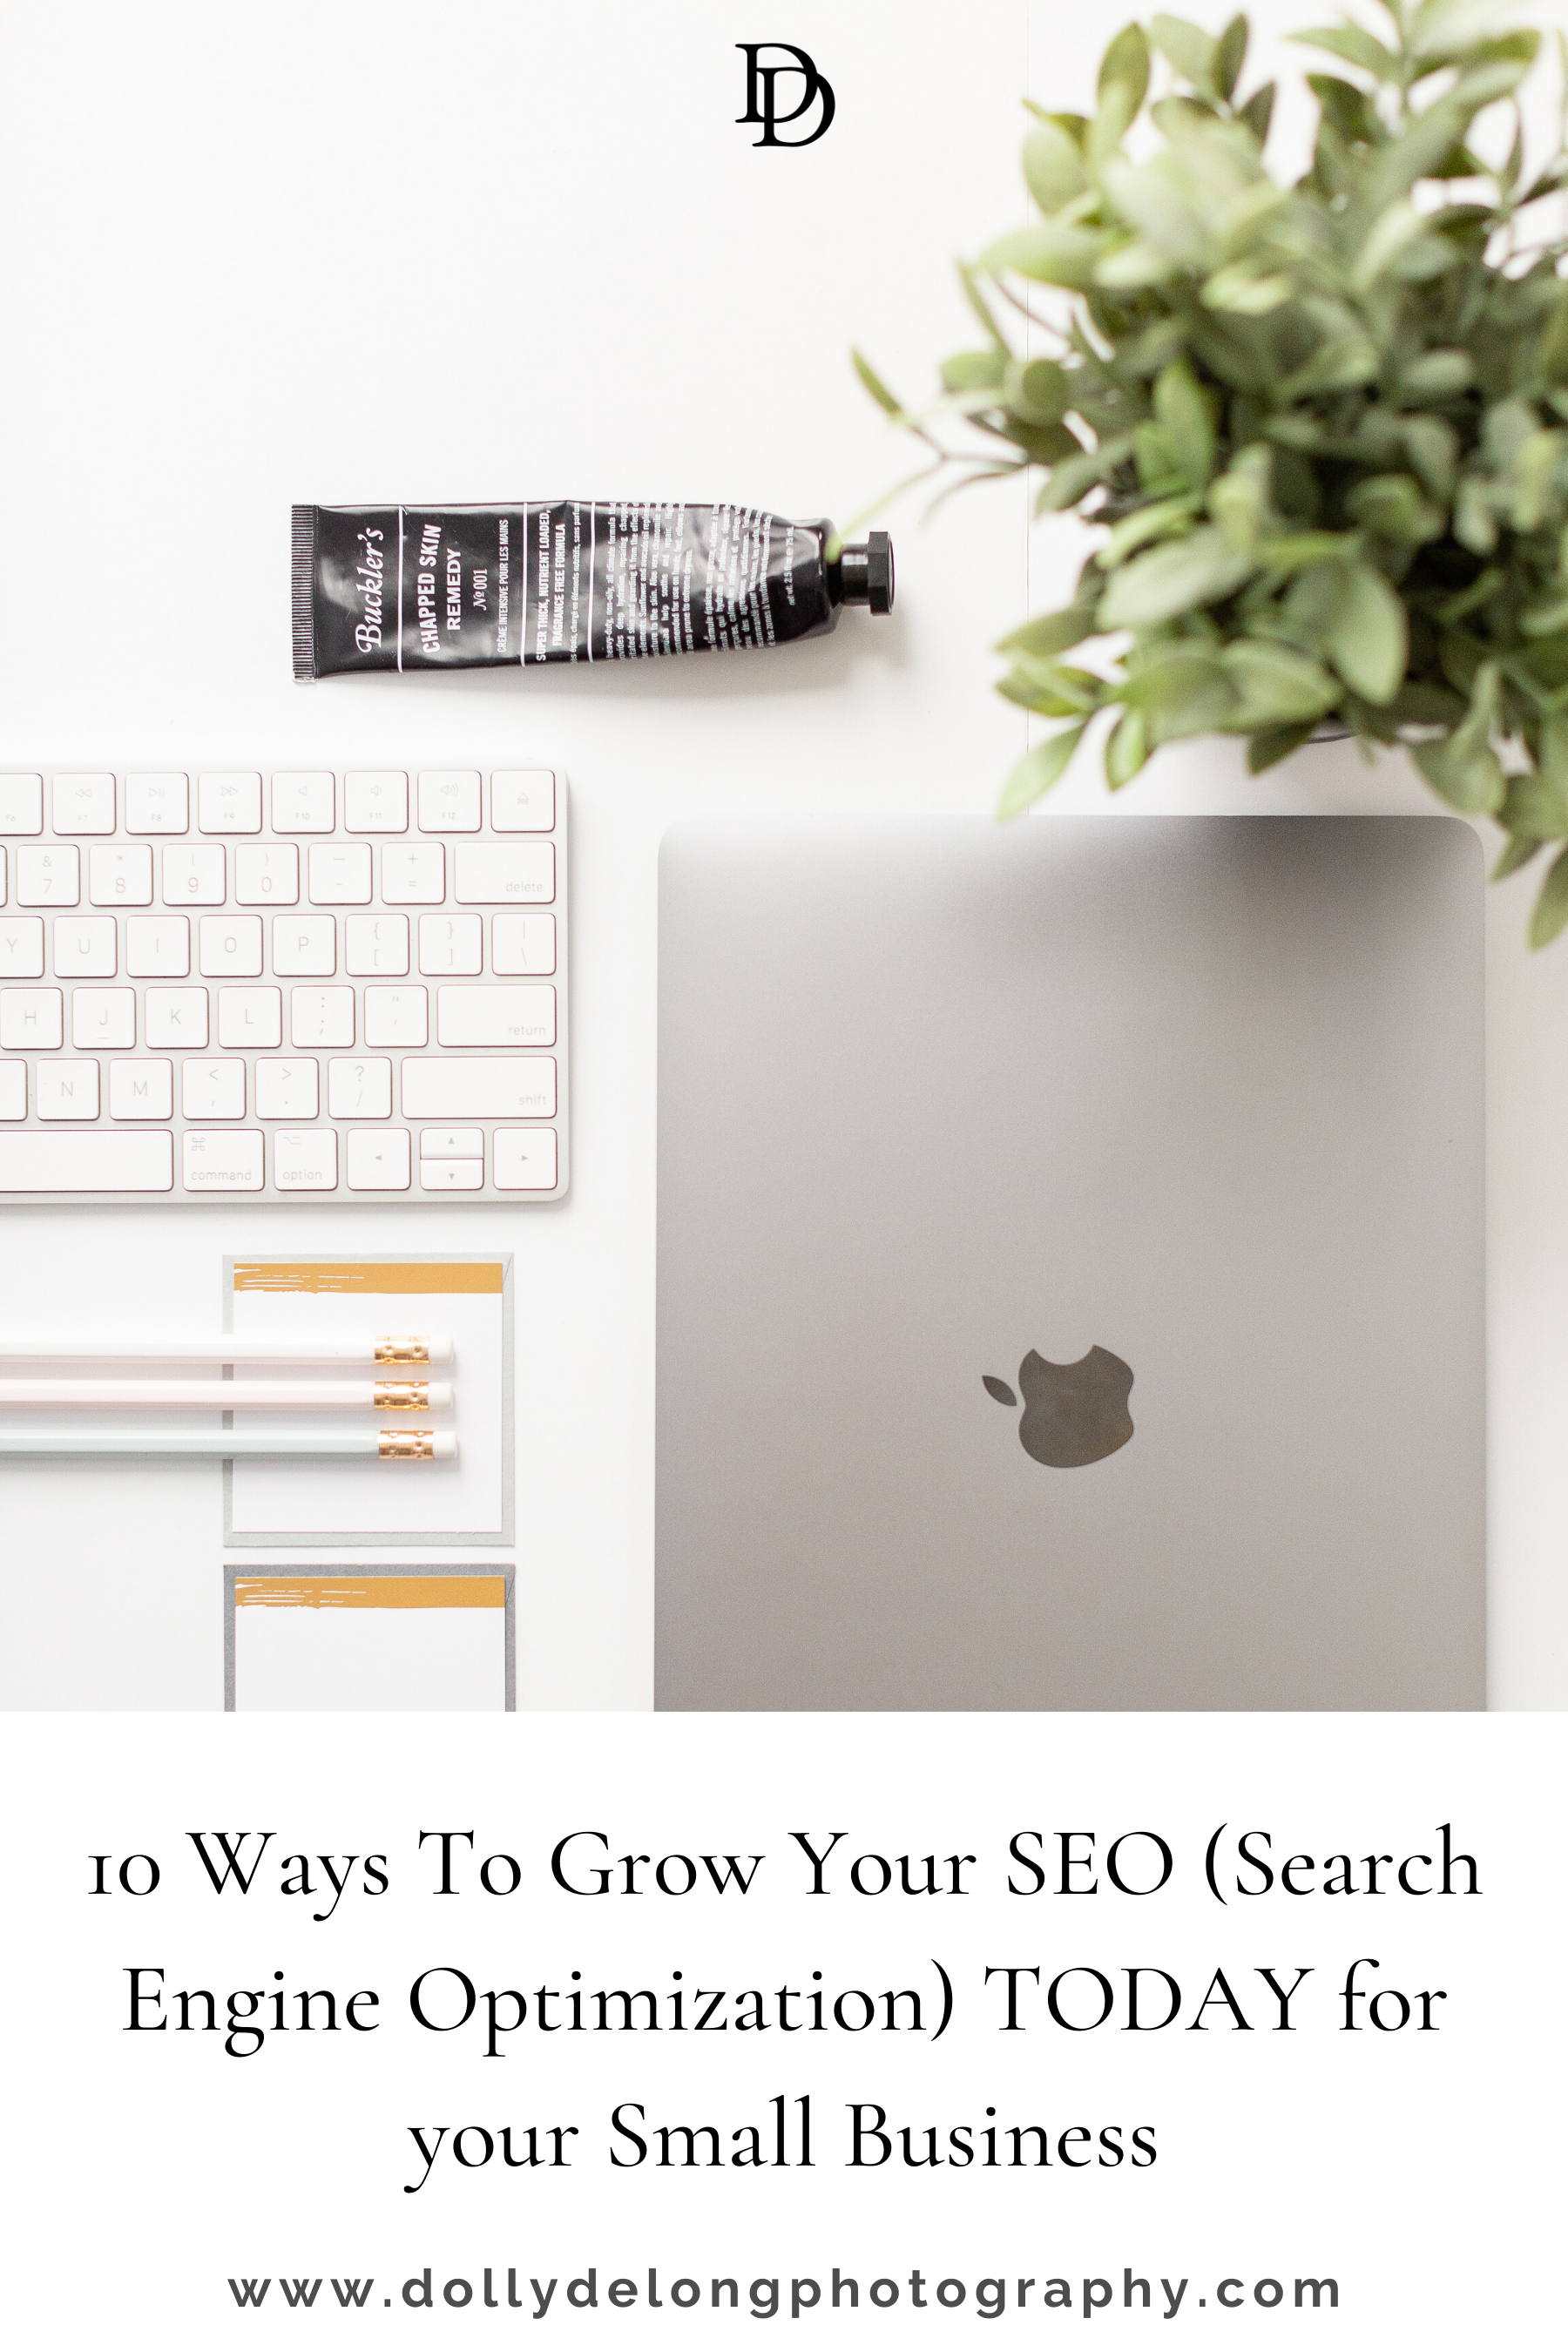 10 Ways To Grow Your SEO (Search Engine Optimization) TODAY for your Small Business by Nashville Branding Photographer Dolly DeLong Photography